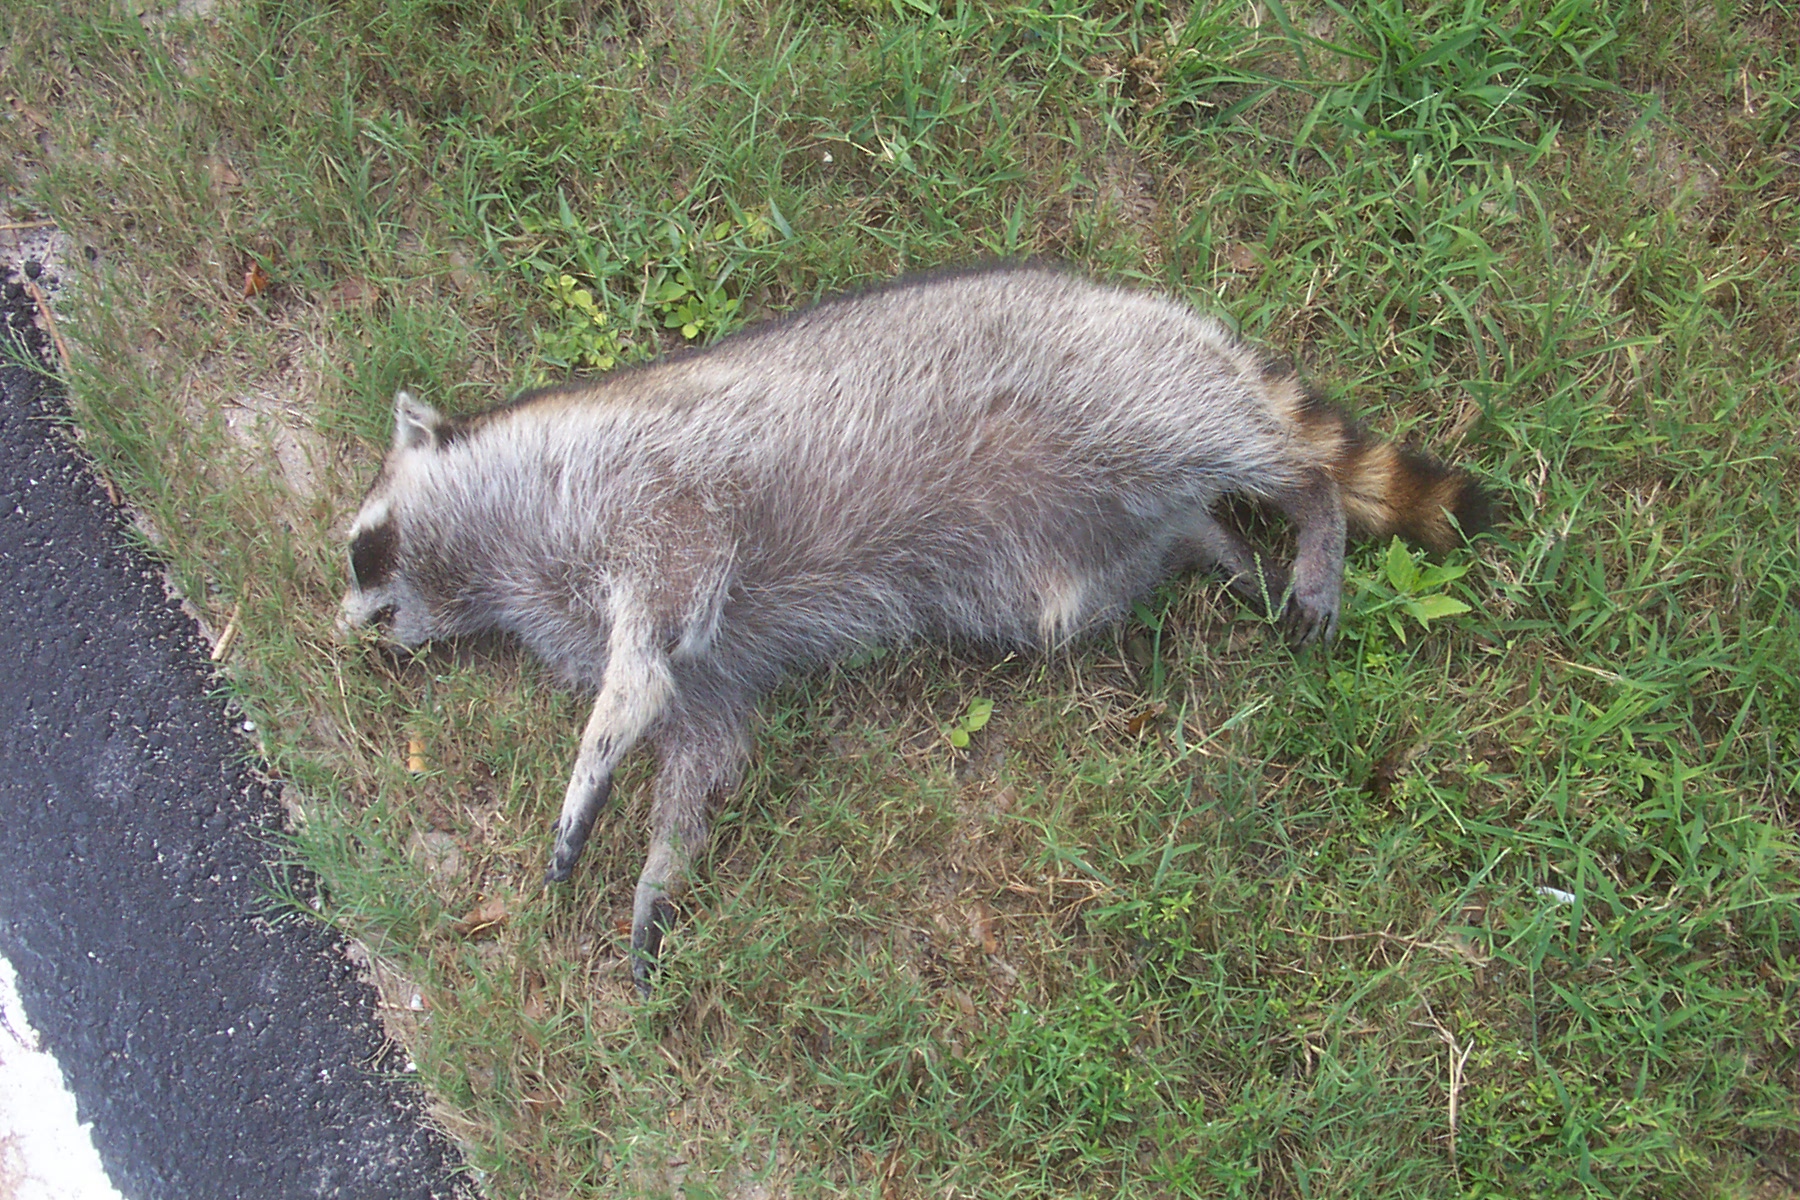 dead animal removal from crawl space, hendersonville tn